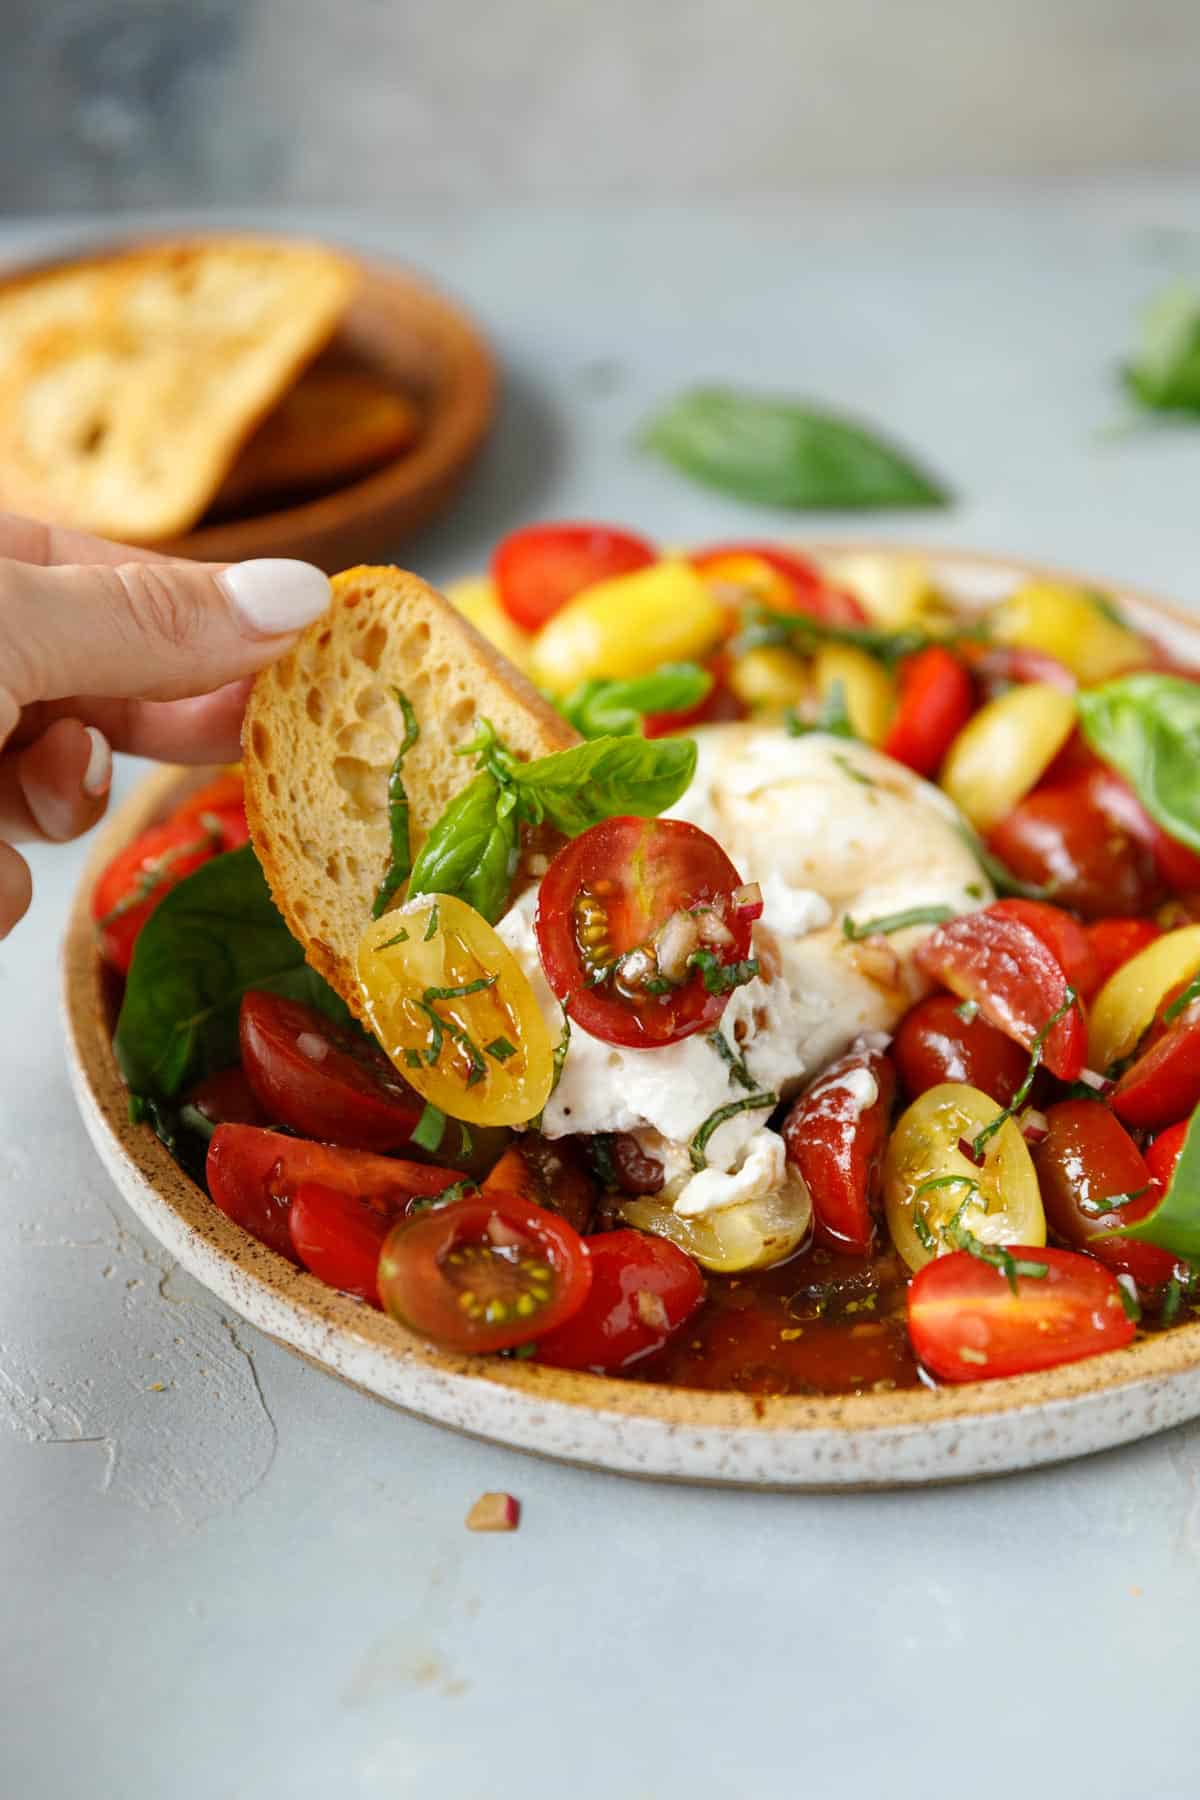 Marinated tomatoes and burrata with a slice of crusty baguette on a speckled plate